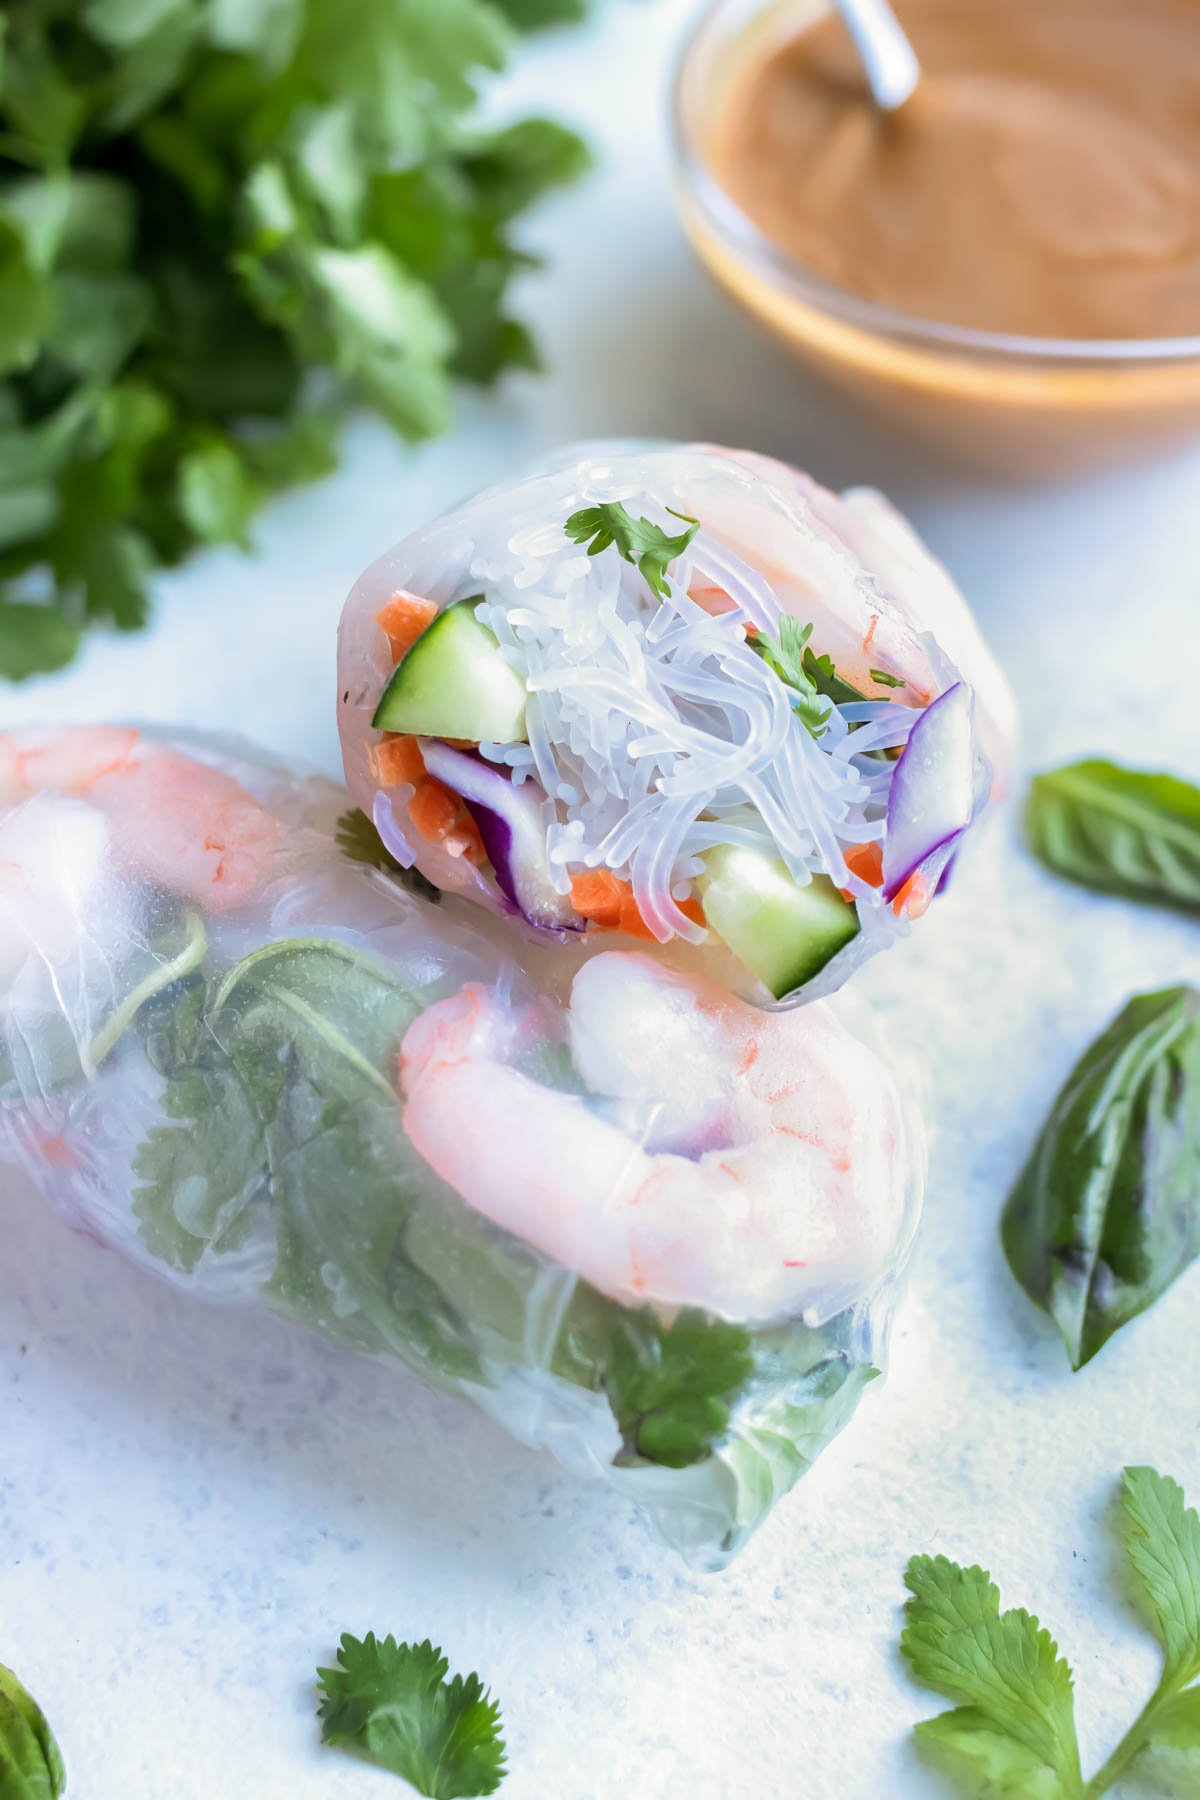 Fresh spring rolls are shown on the counter with herbs and a peanut sauce behind them.